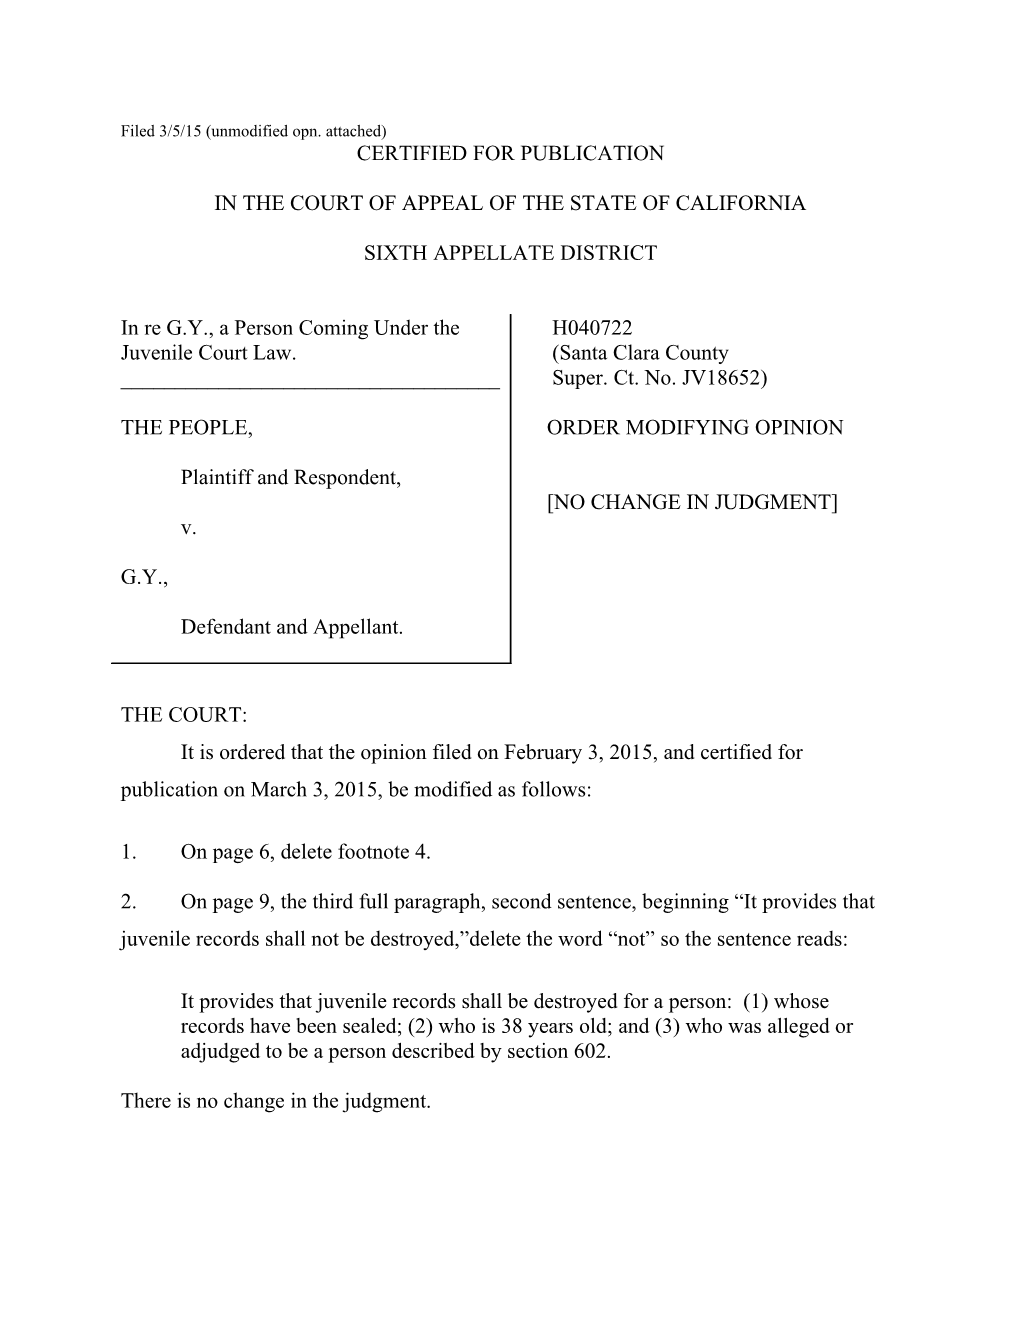 Filed 3/5/15 (Unmodified Opn. Attached)